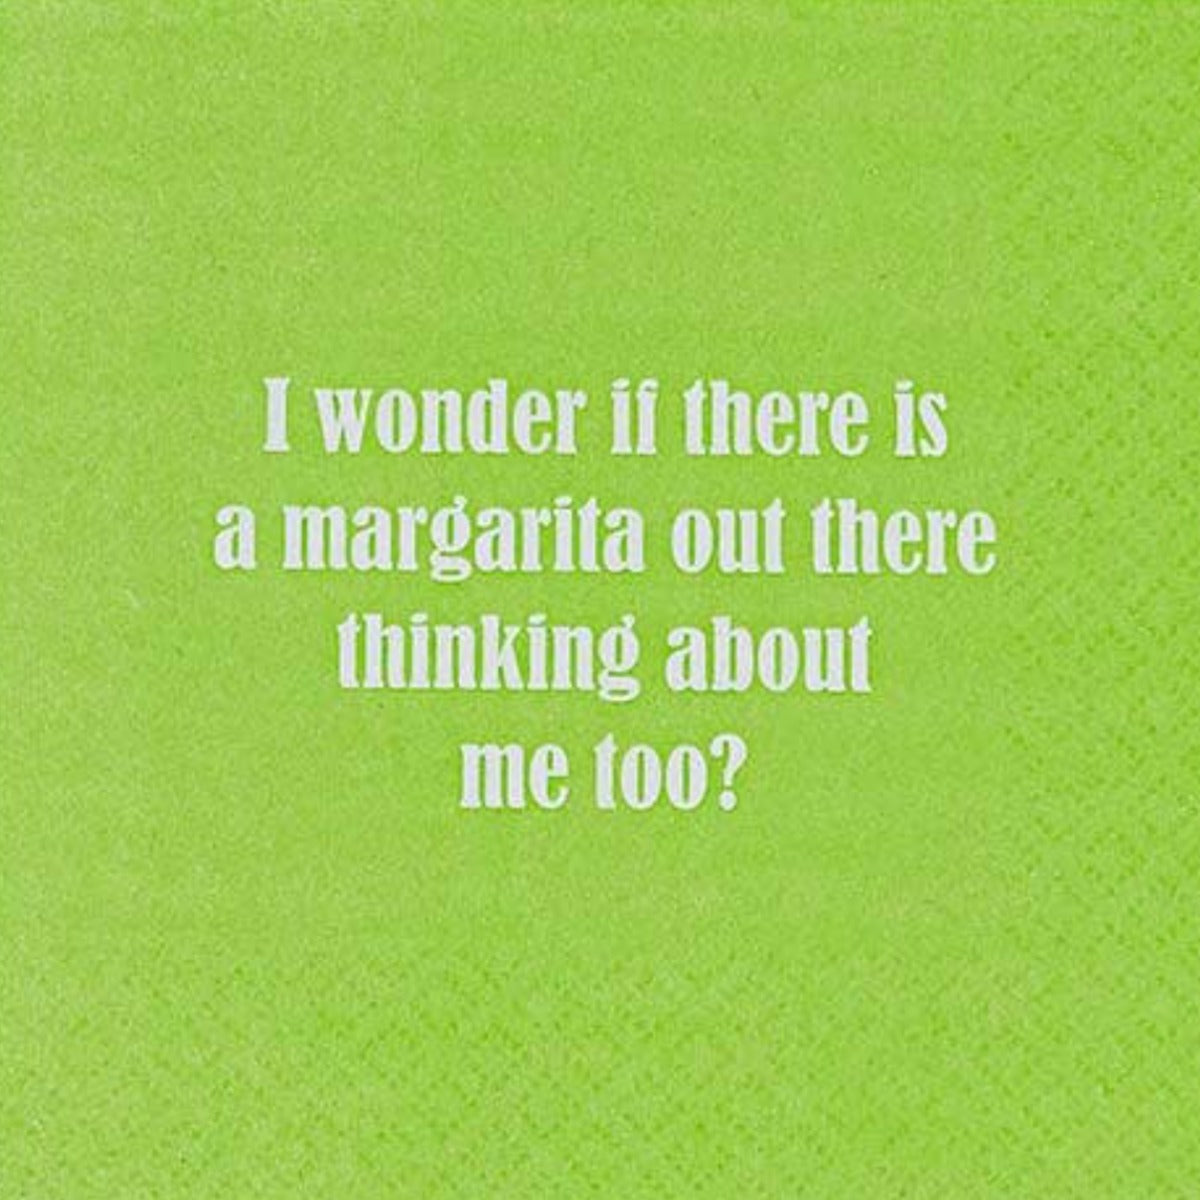 " I Wonder If There Is A Margarita Out There Thinking About Me Too? Napkin Media 1 of 1